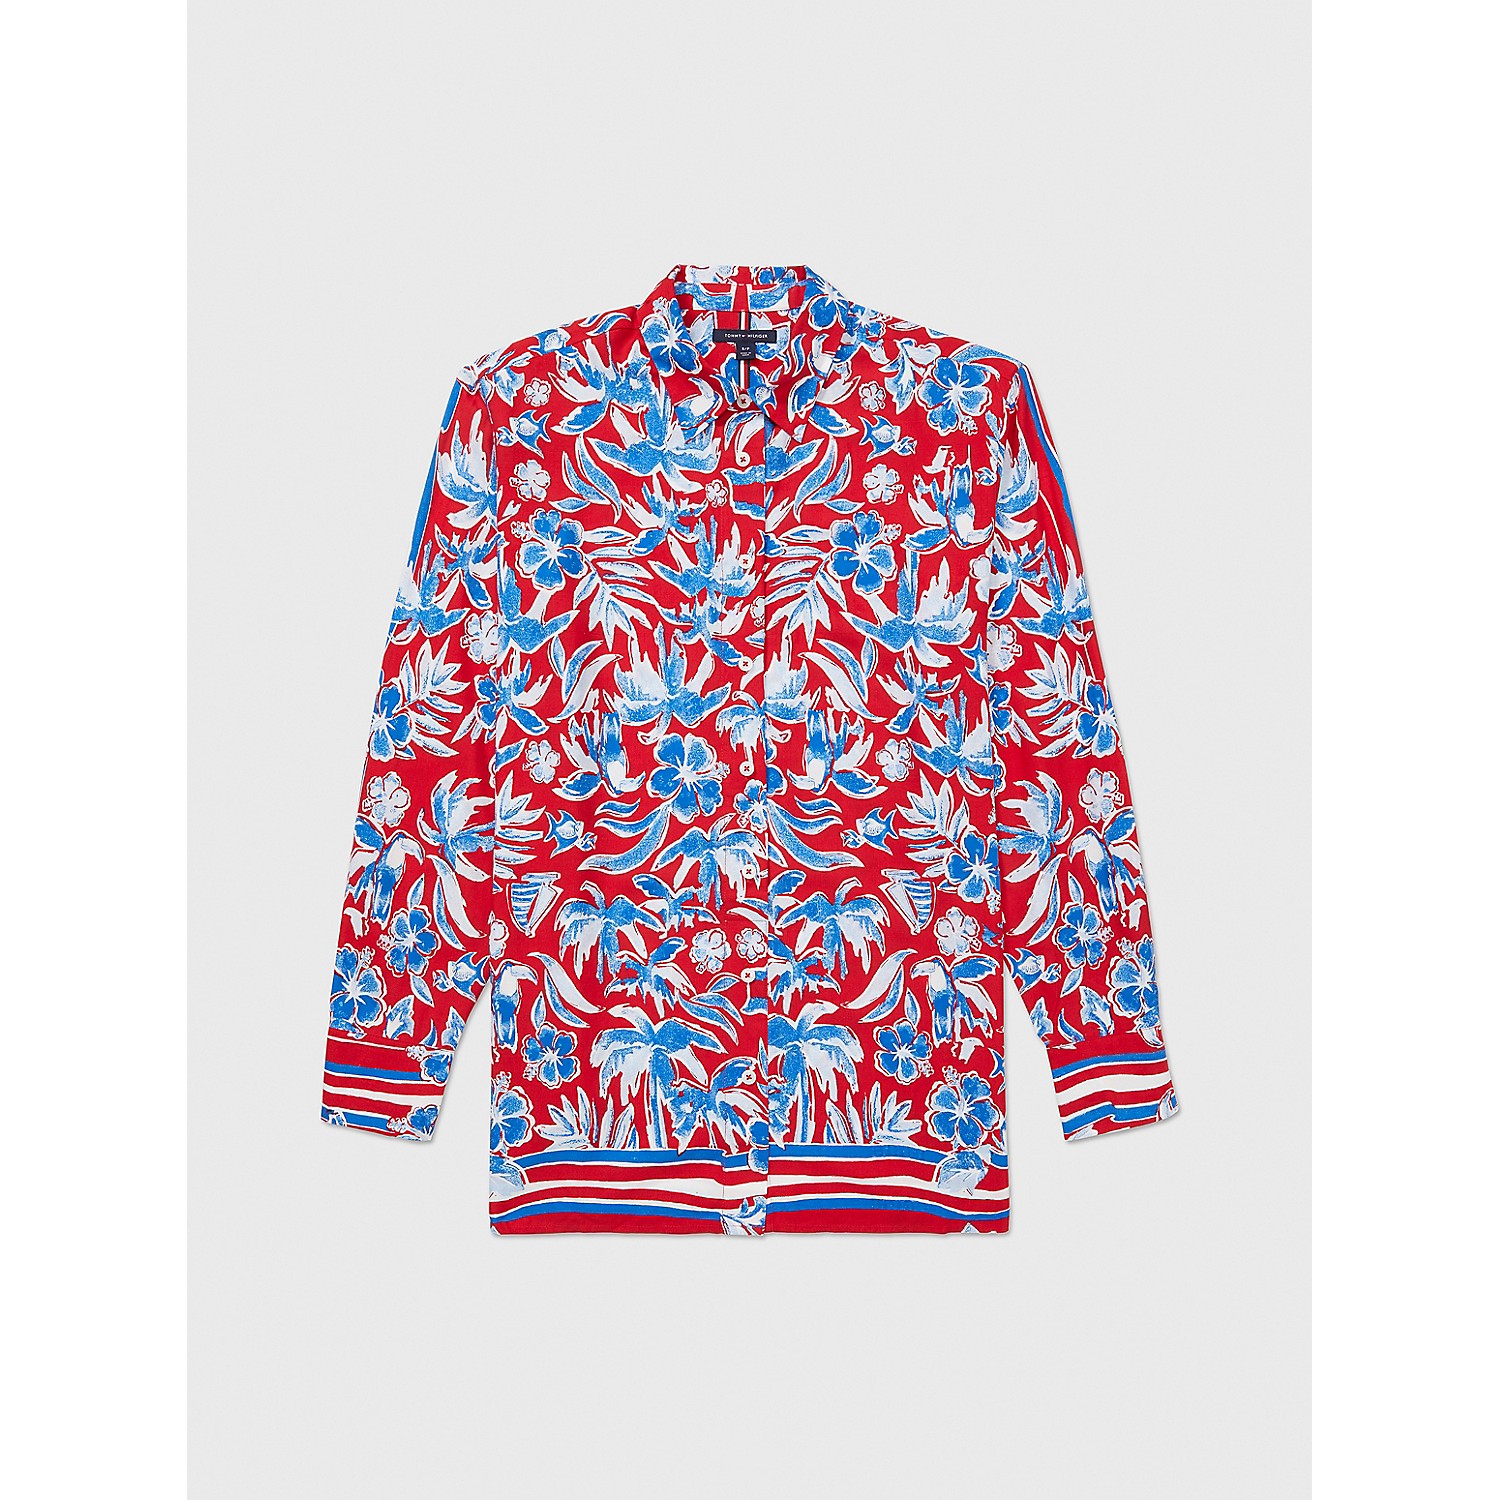 TOMMY ADAPTIVE Floral Blouse